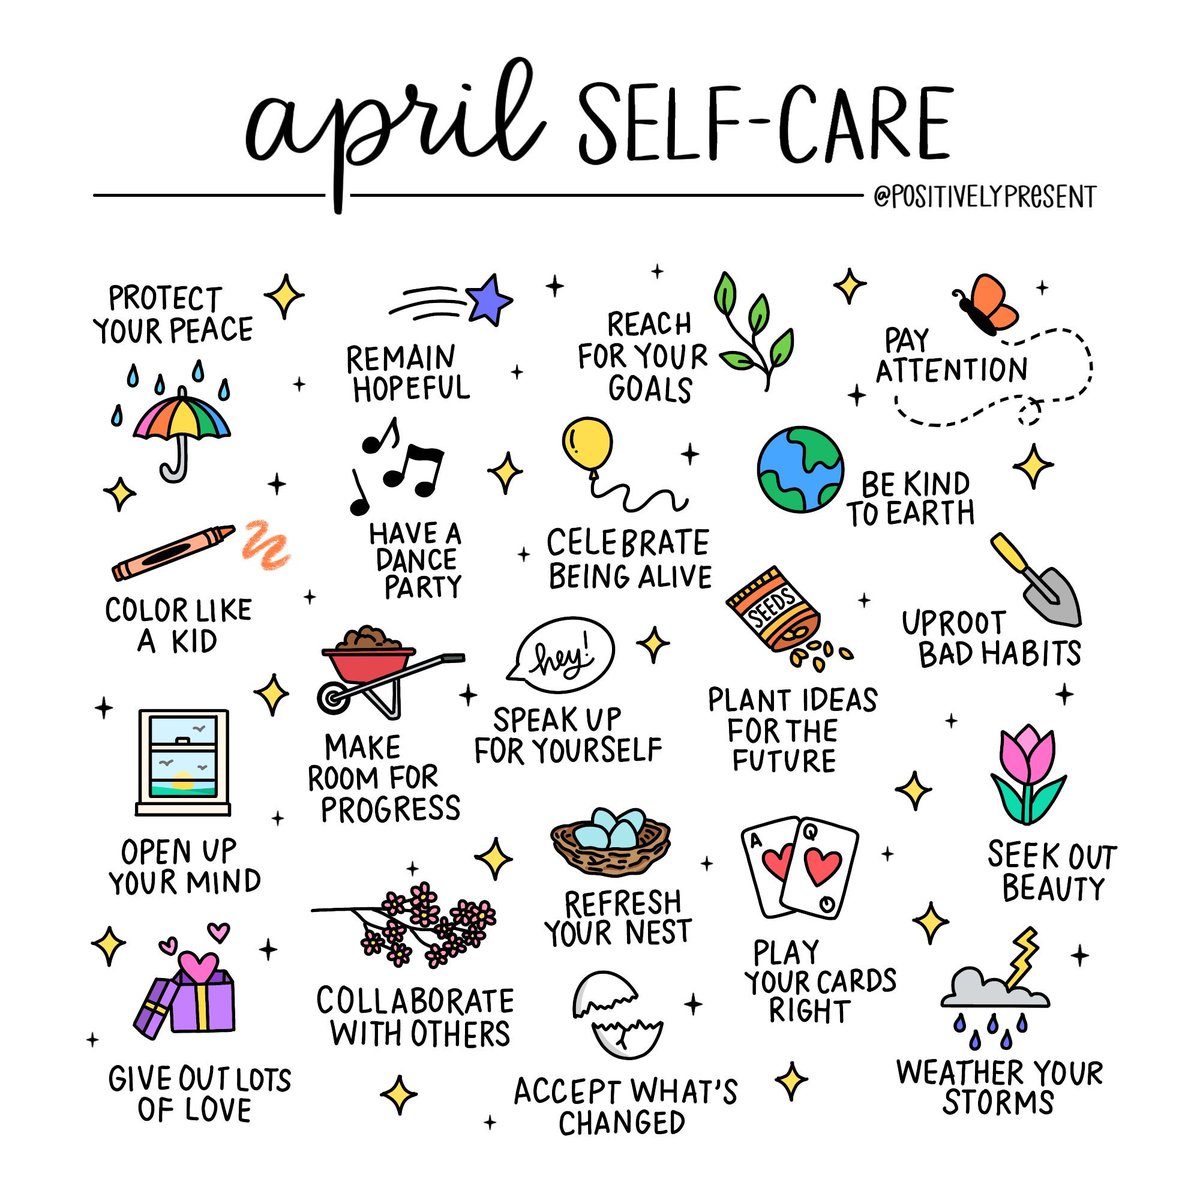 It's a month...how many self-care activities will you do in April? ✨🌺